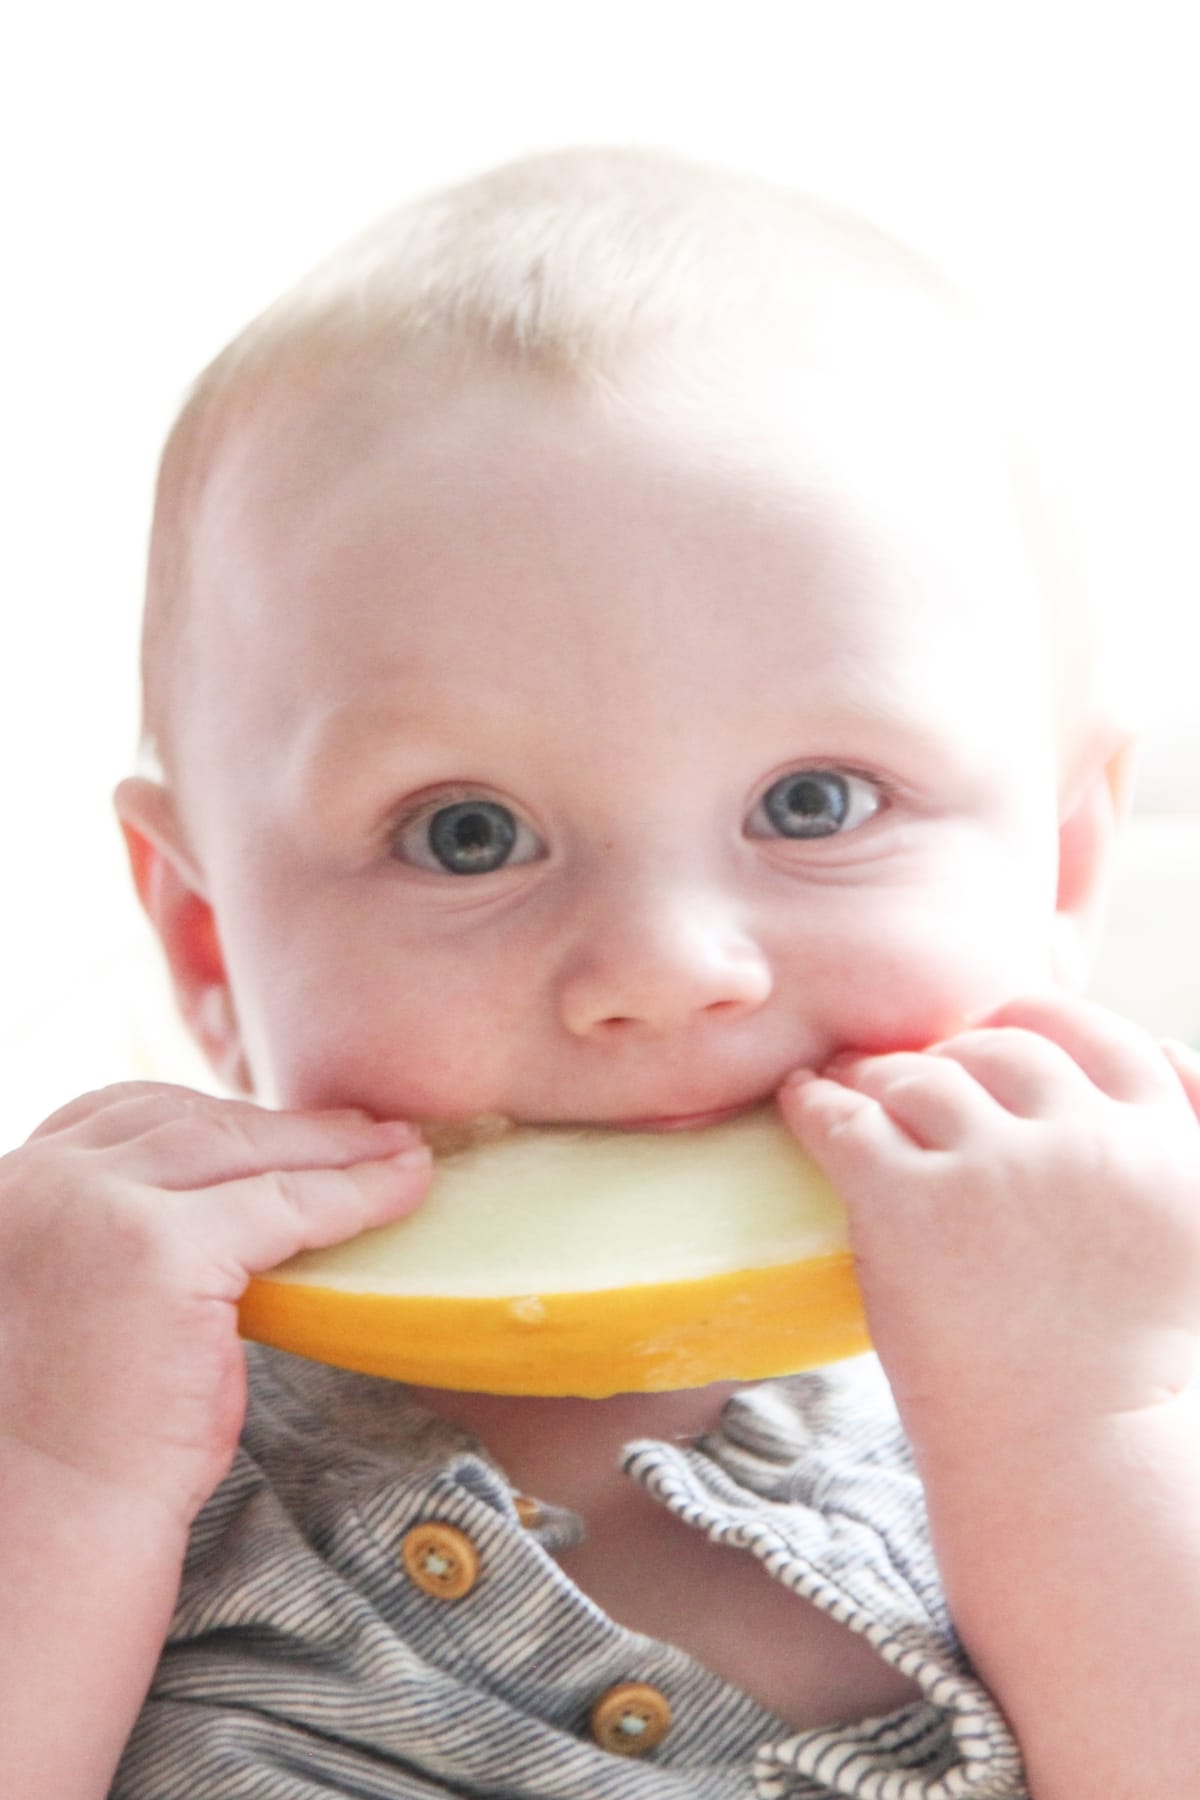 baby eating a wedge of melon.